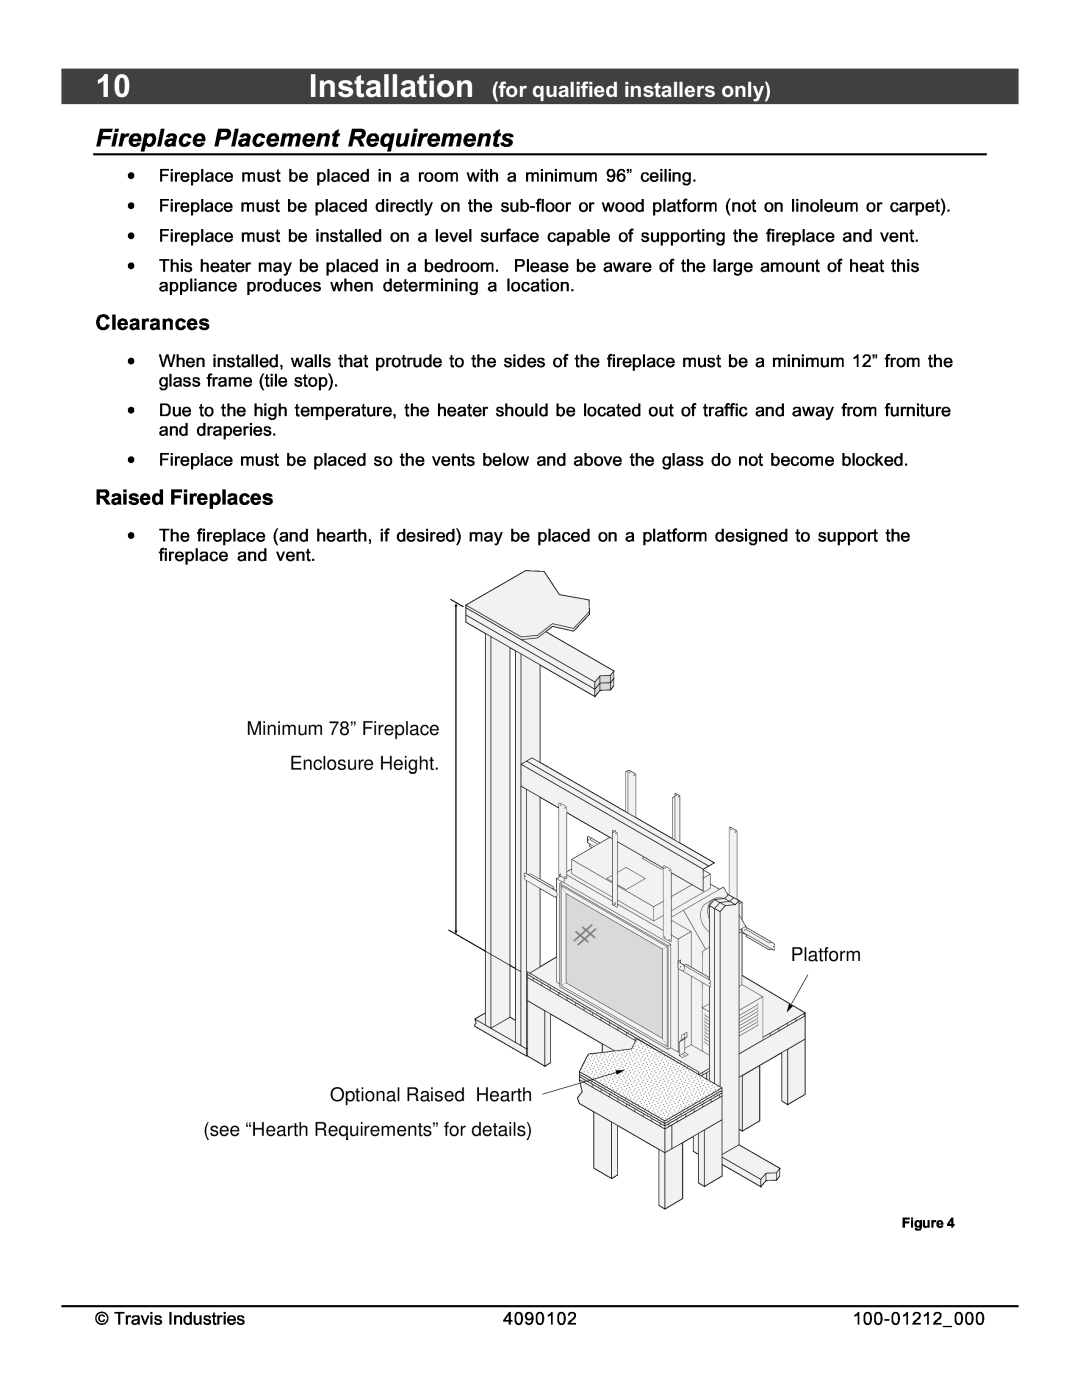 FireplaceXtrordinair 36CF installation manual Fireplace Placement Requirements, Clearances, Raised Fireplaces 